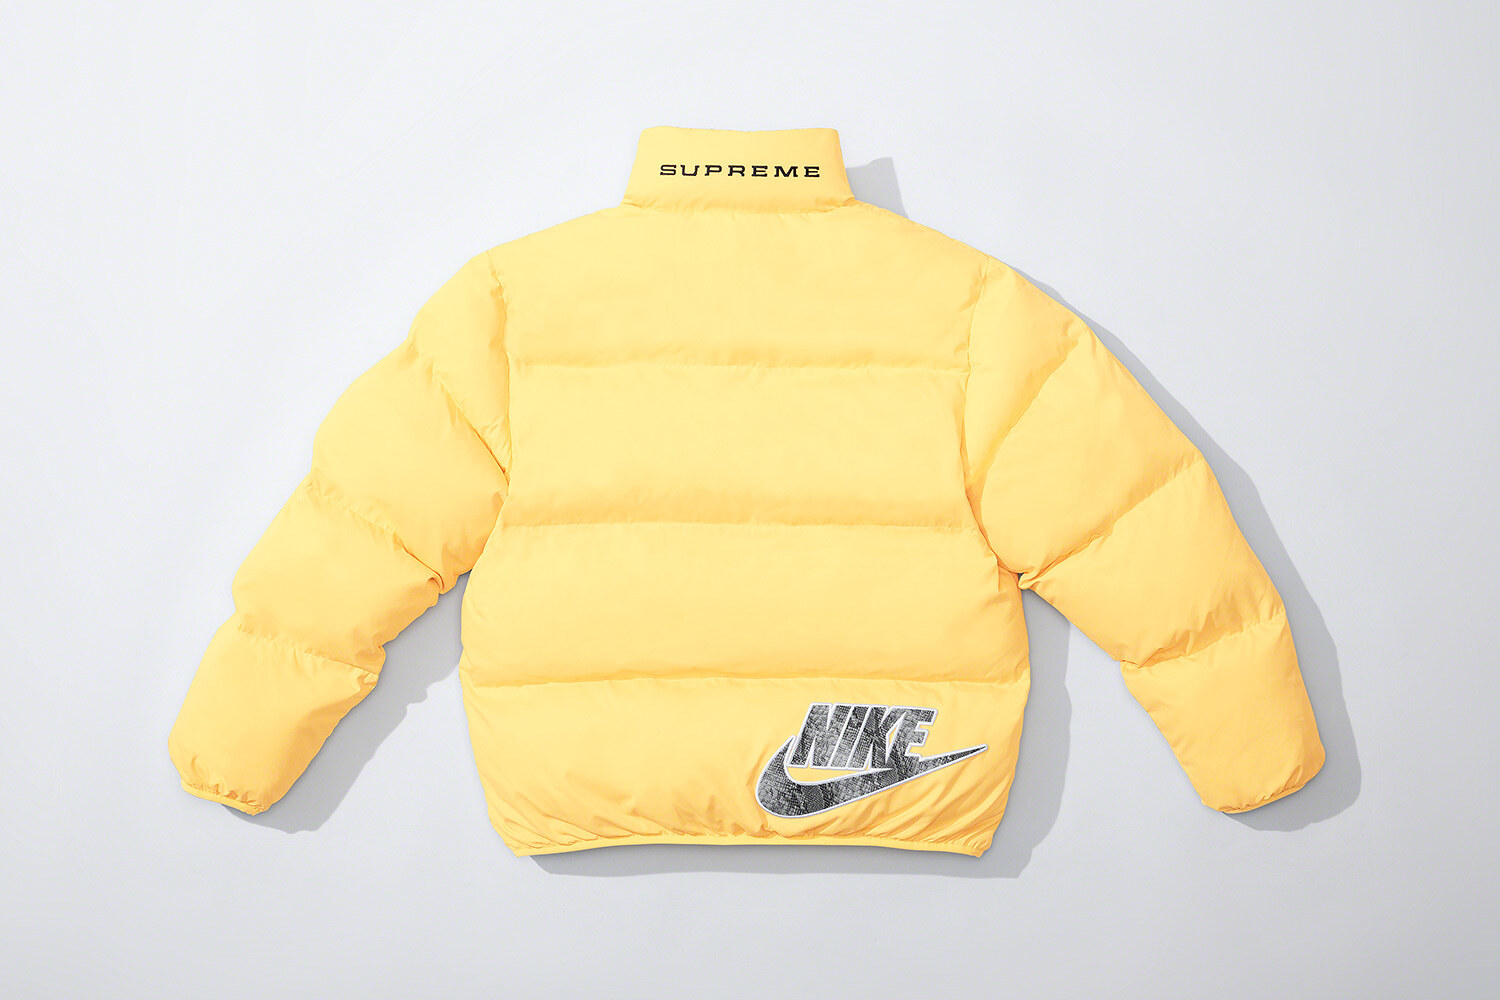 Supreme x Nike Spring/Summer 2021 collection